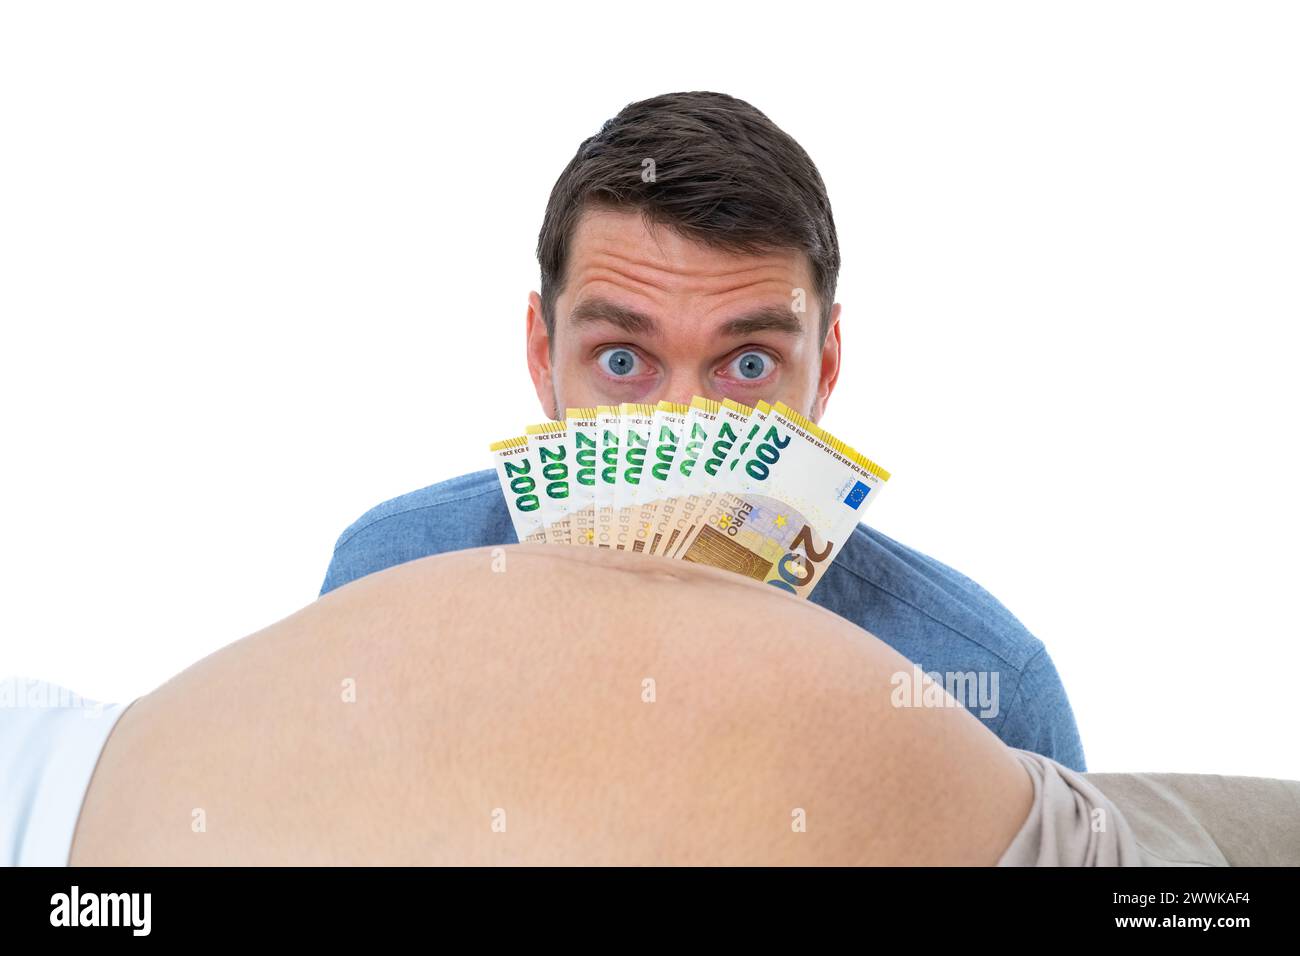 Description: Expectant father in front of pregnant baby bump holds banknotes in front of his face and looks worried. Last month of pregnancy - week 39 Stock Photo